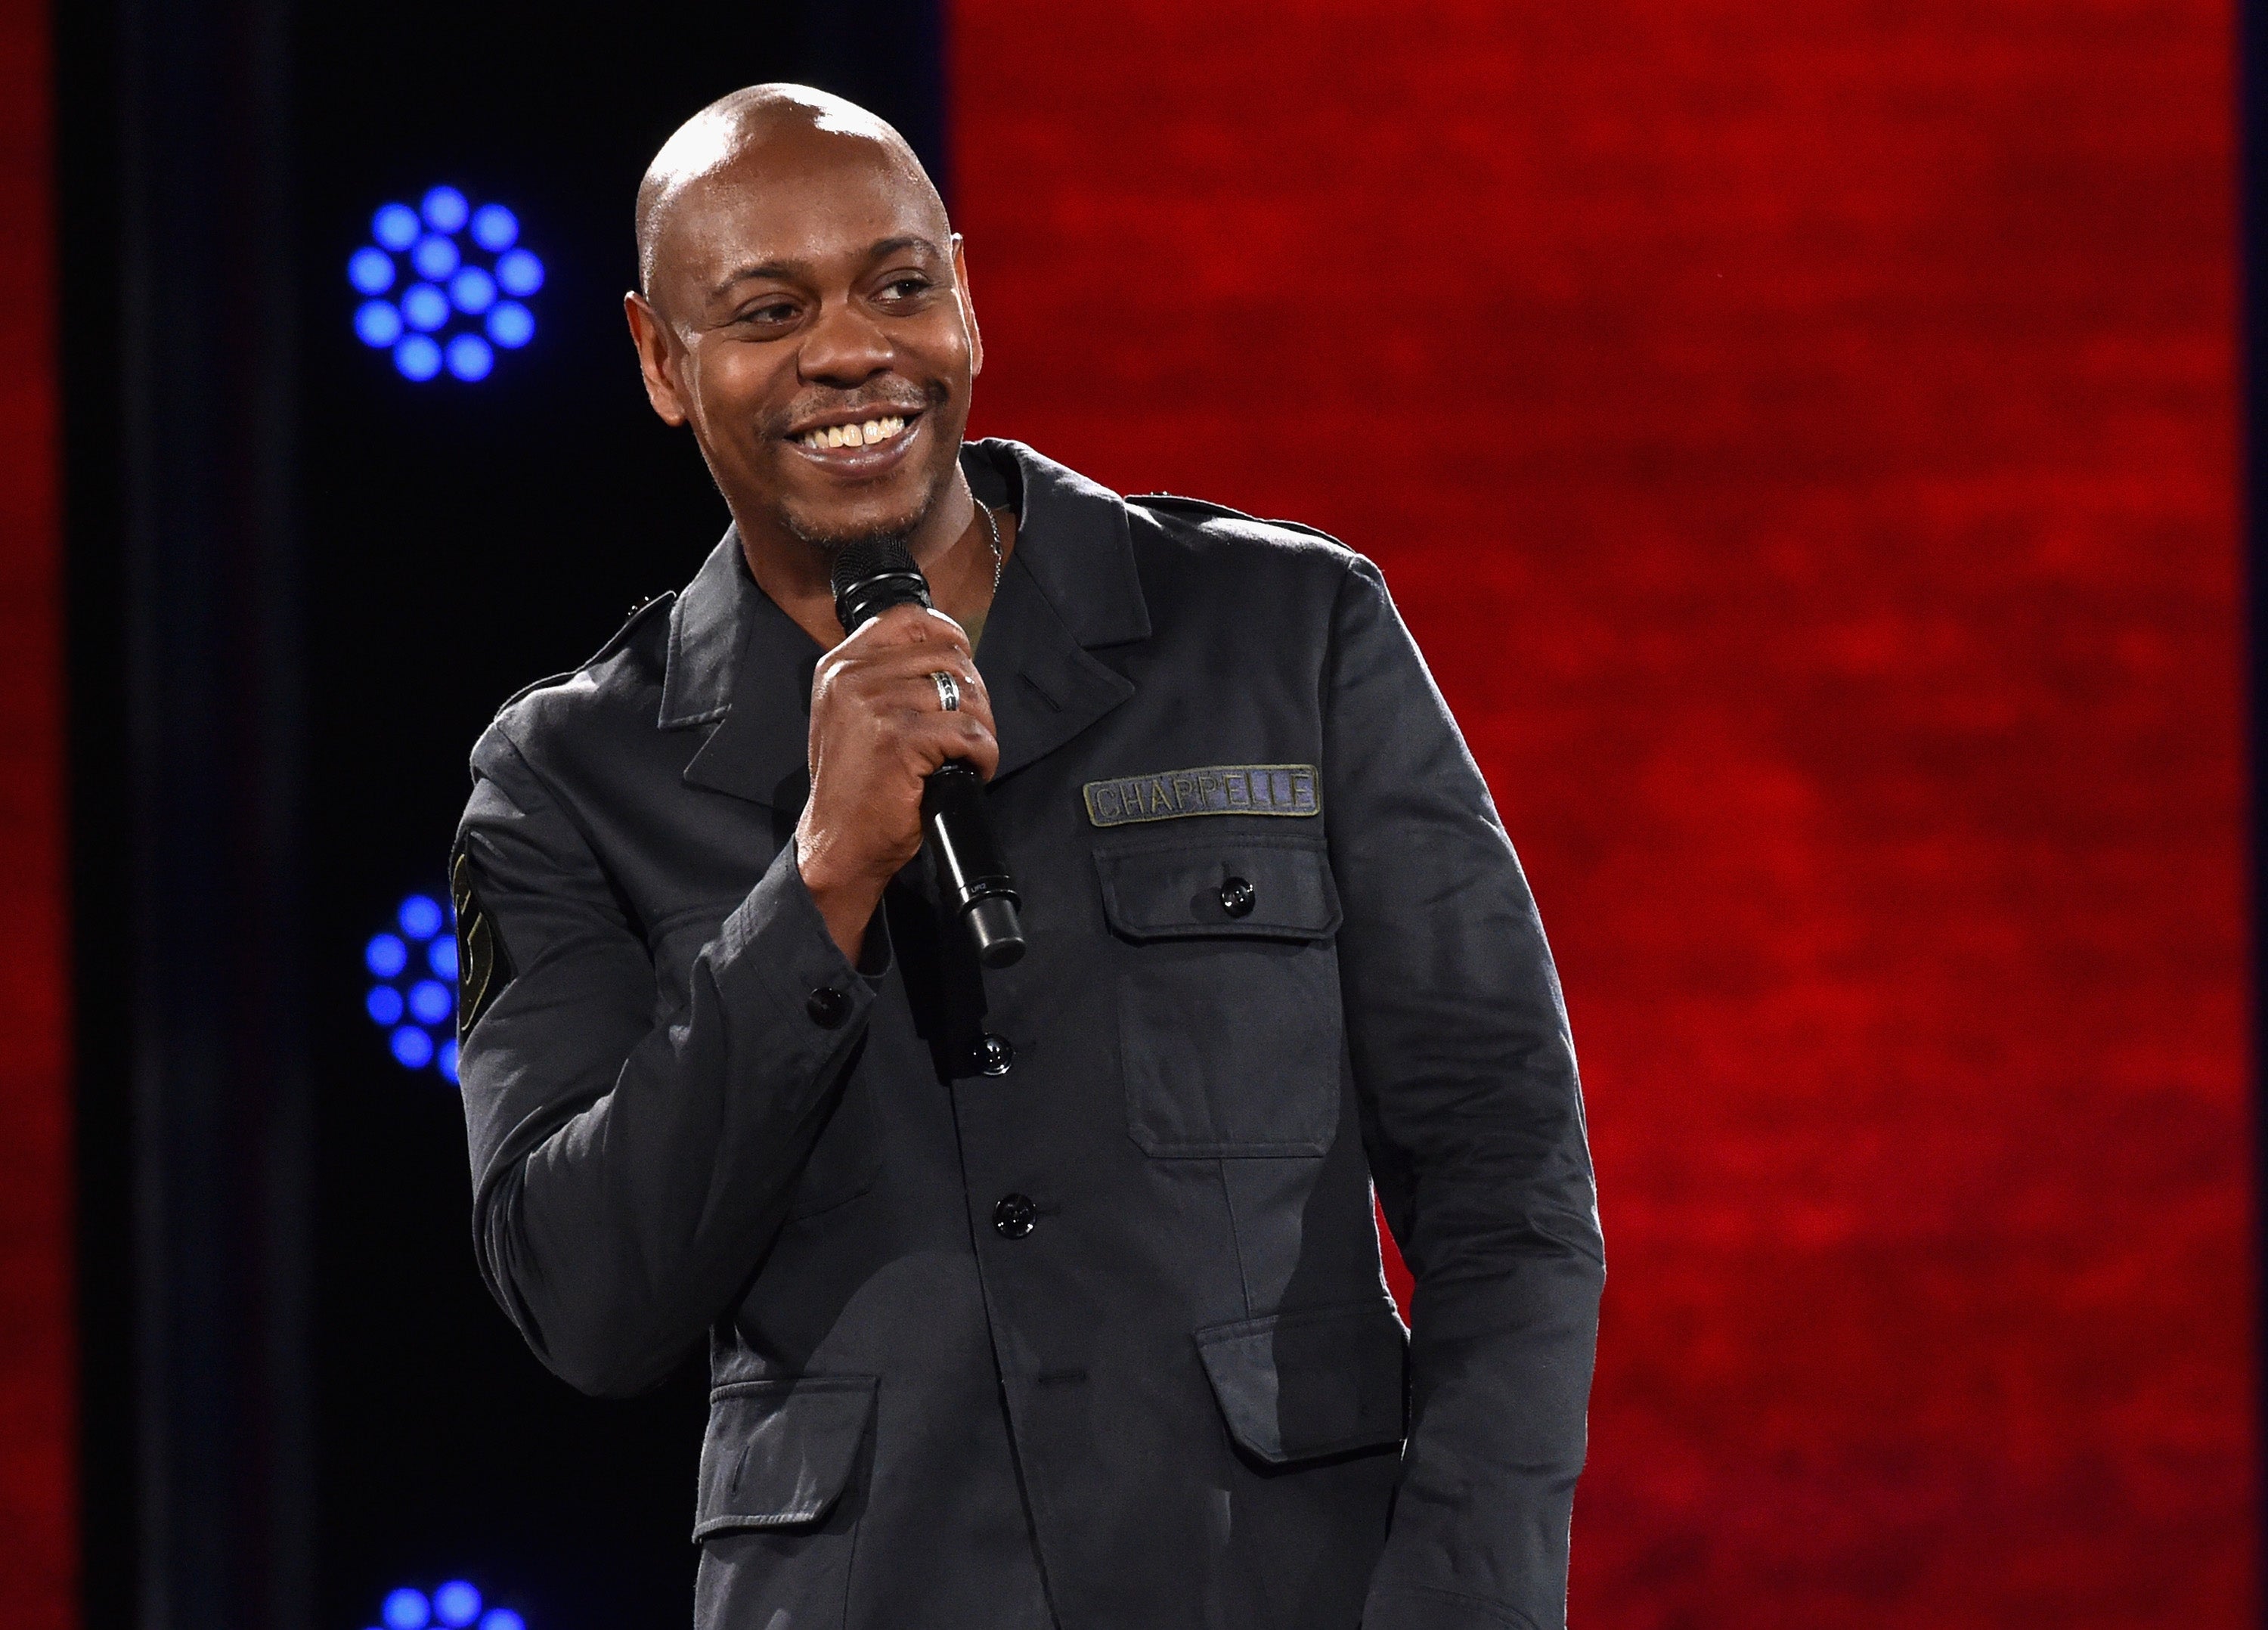 The Teaser For Dave Chappelle's New Comedy Special Includes A Fitting Trump Joke
